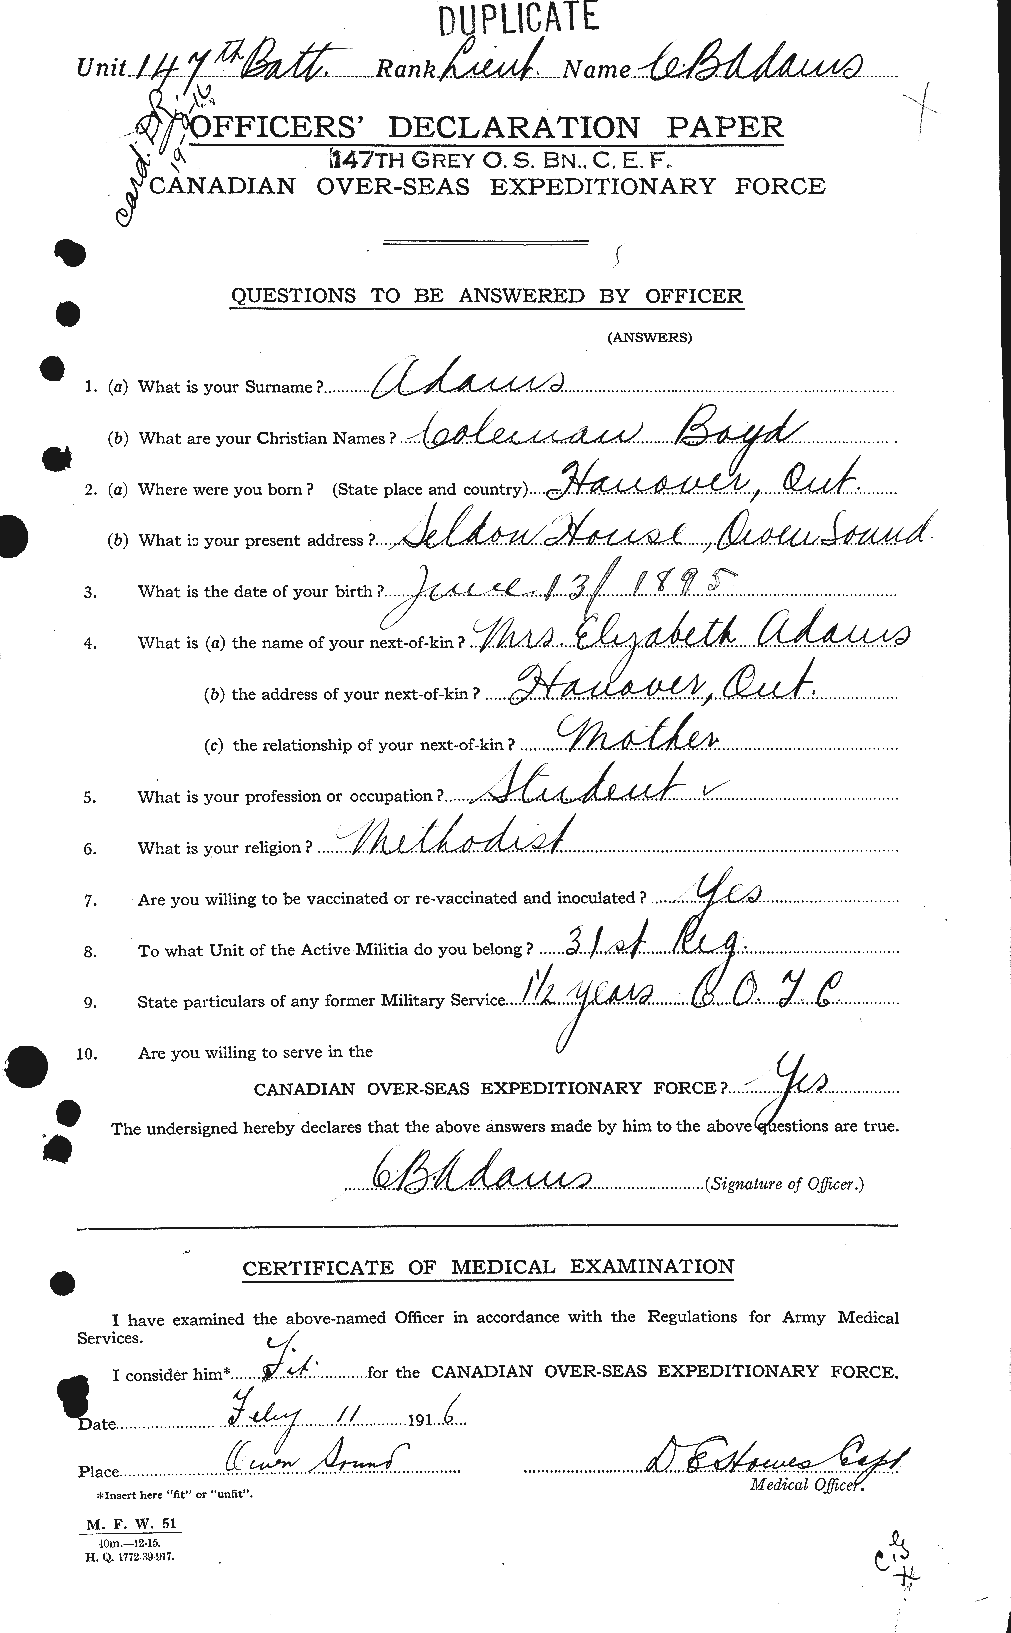 Personnel Records of the First World War - CEF 202646a